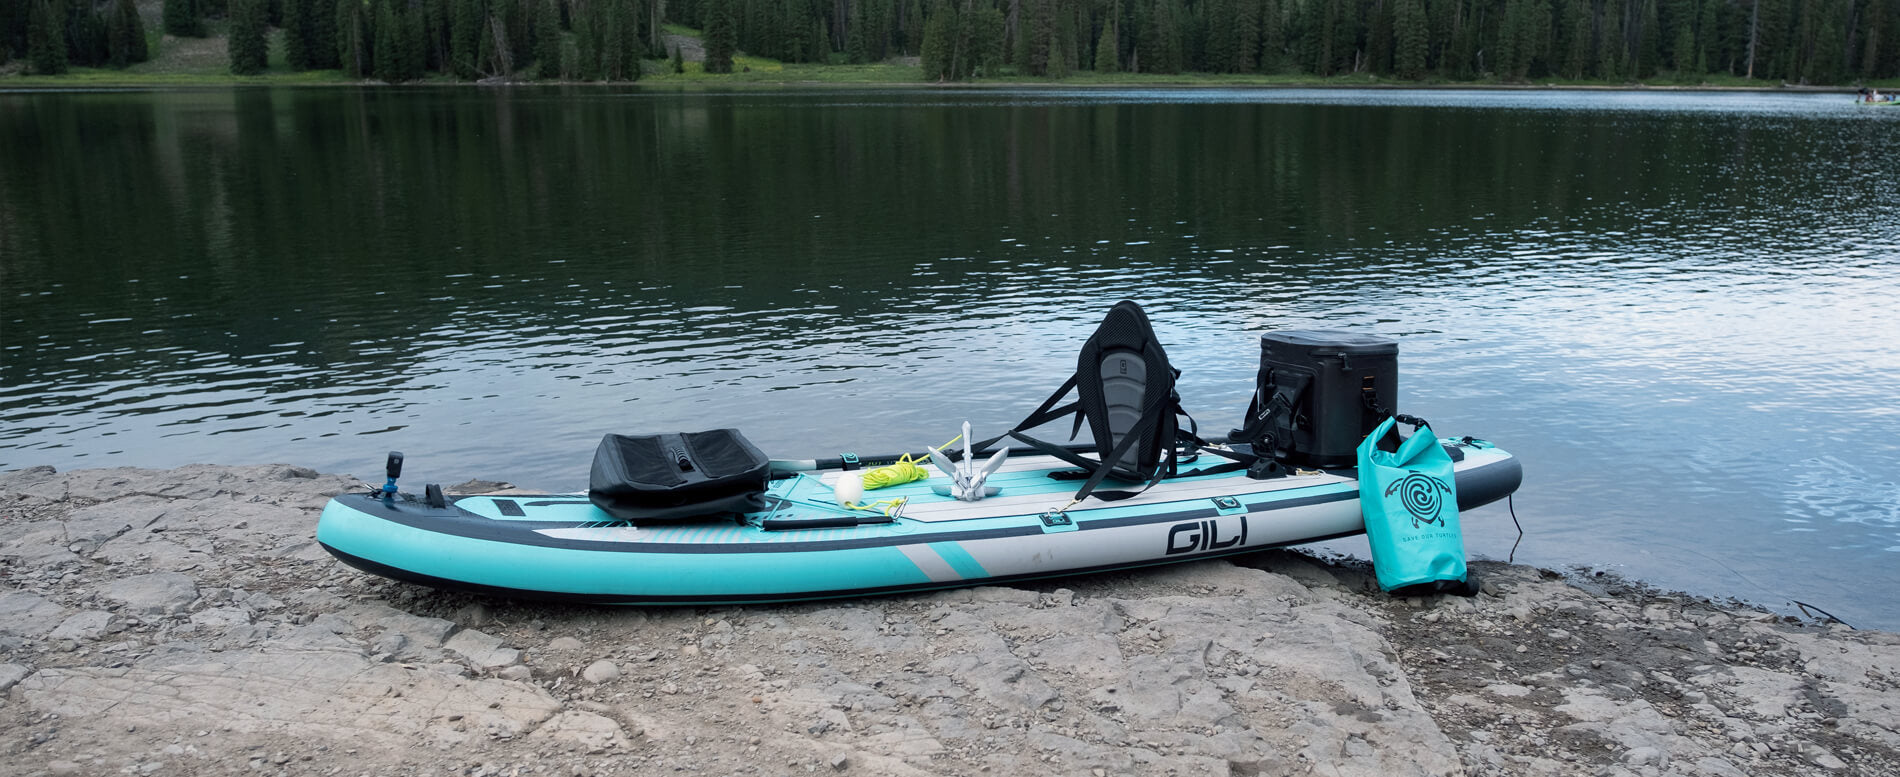 Prime Day paddle board accessories: the best deals from pumps to